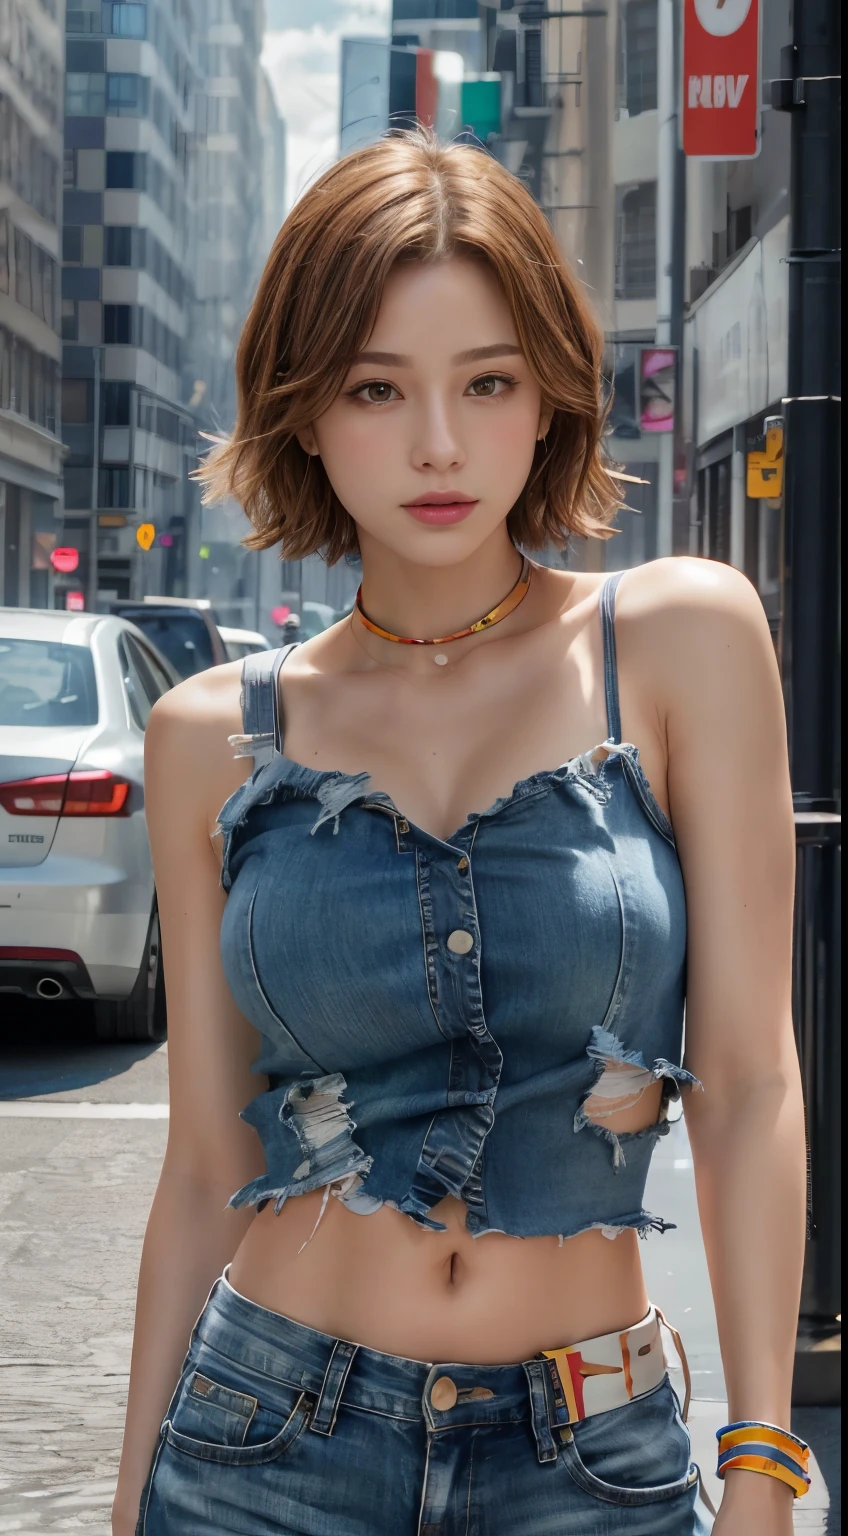 ((Mid-chest, Tomboy,)),  (Trained abdominal muscles : 1.1), (Perfect body : 1.1), (Short Wavy Hair : 1.2) , Auburn Hair, collar, Lock, Full Body Shot, Crowded street, Wearing a tank top, Jeans jacket, (Torn clothes:1.3)((Shorts)), (Very detailed CG 8k wallpaper), (Very delicate and beautiful), (masterpiece), (highest quality:1.0), (ultra High resolution:1.0),  Beautiful lighting ,Perfect Lightning, Realistic Shadows, [High resolution], Detailed skin, Very detailed (((colorful))),High Reality,